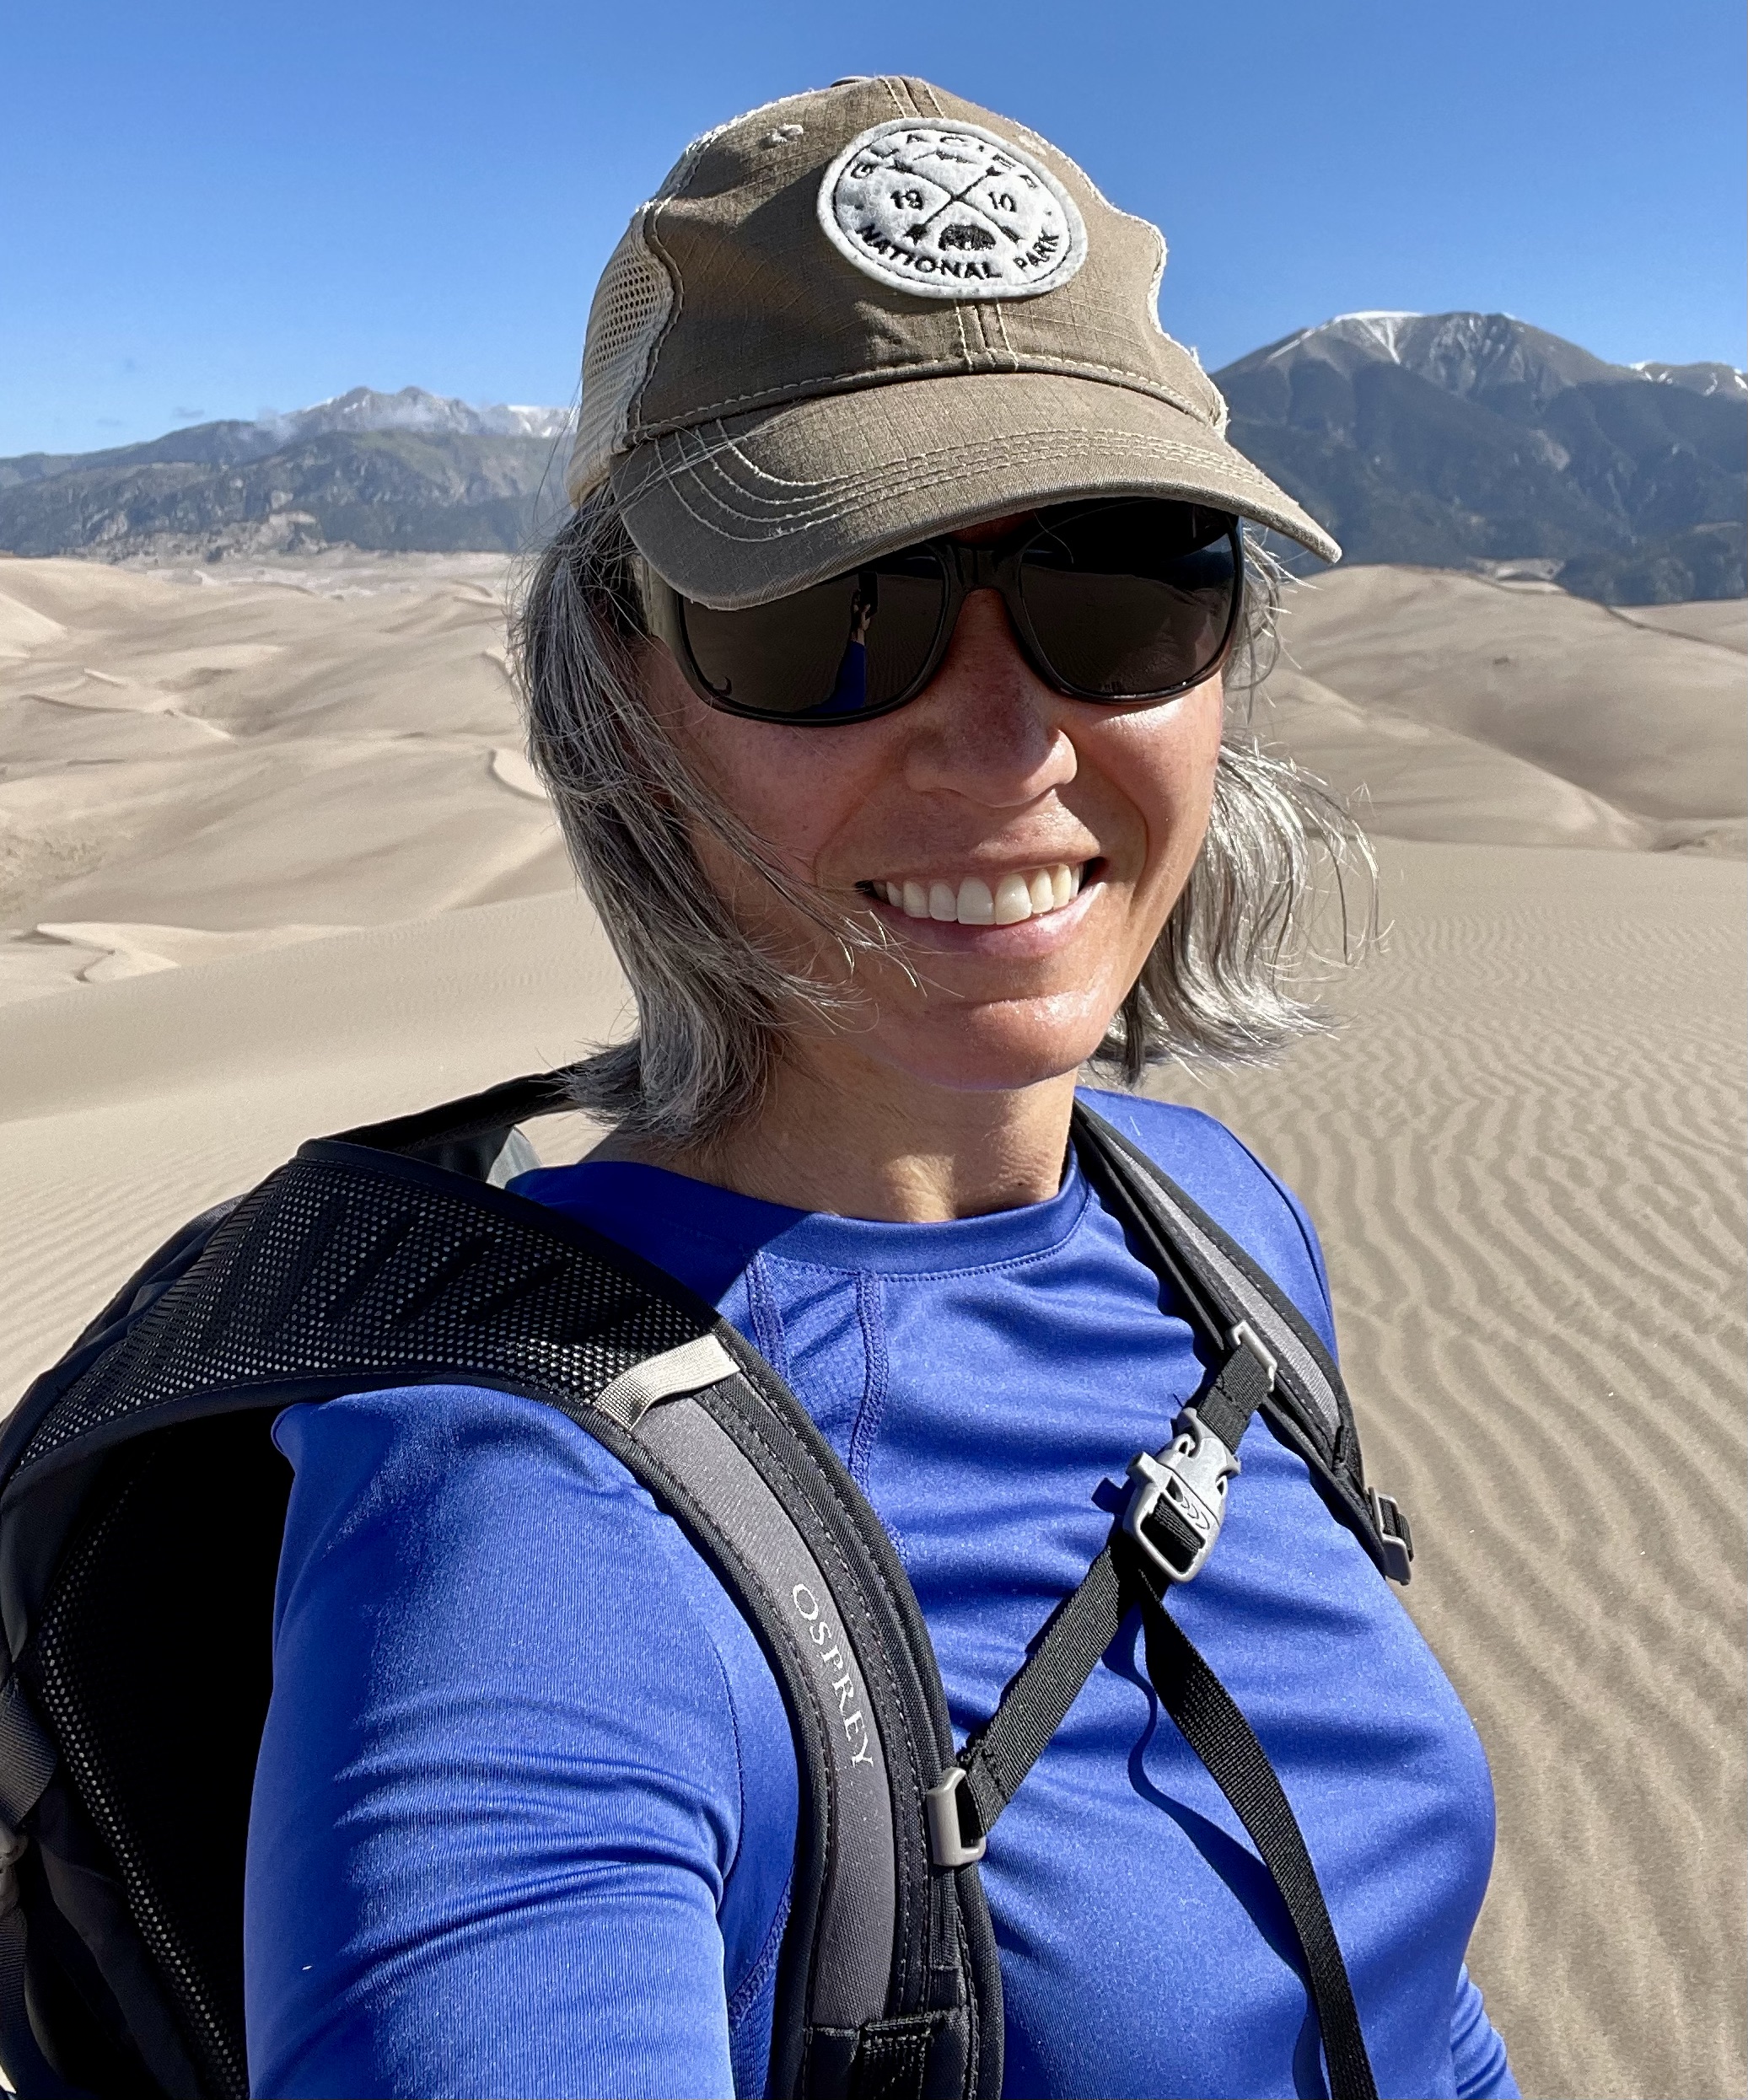 Beth in a blue shirt wearing a hat standing on top of Sand Dunes